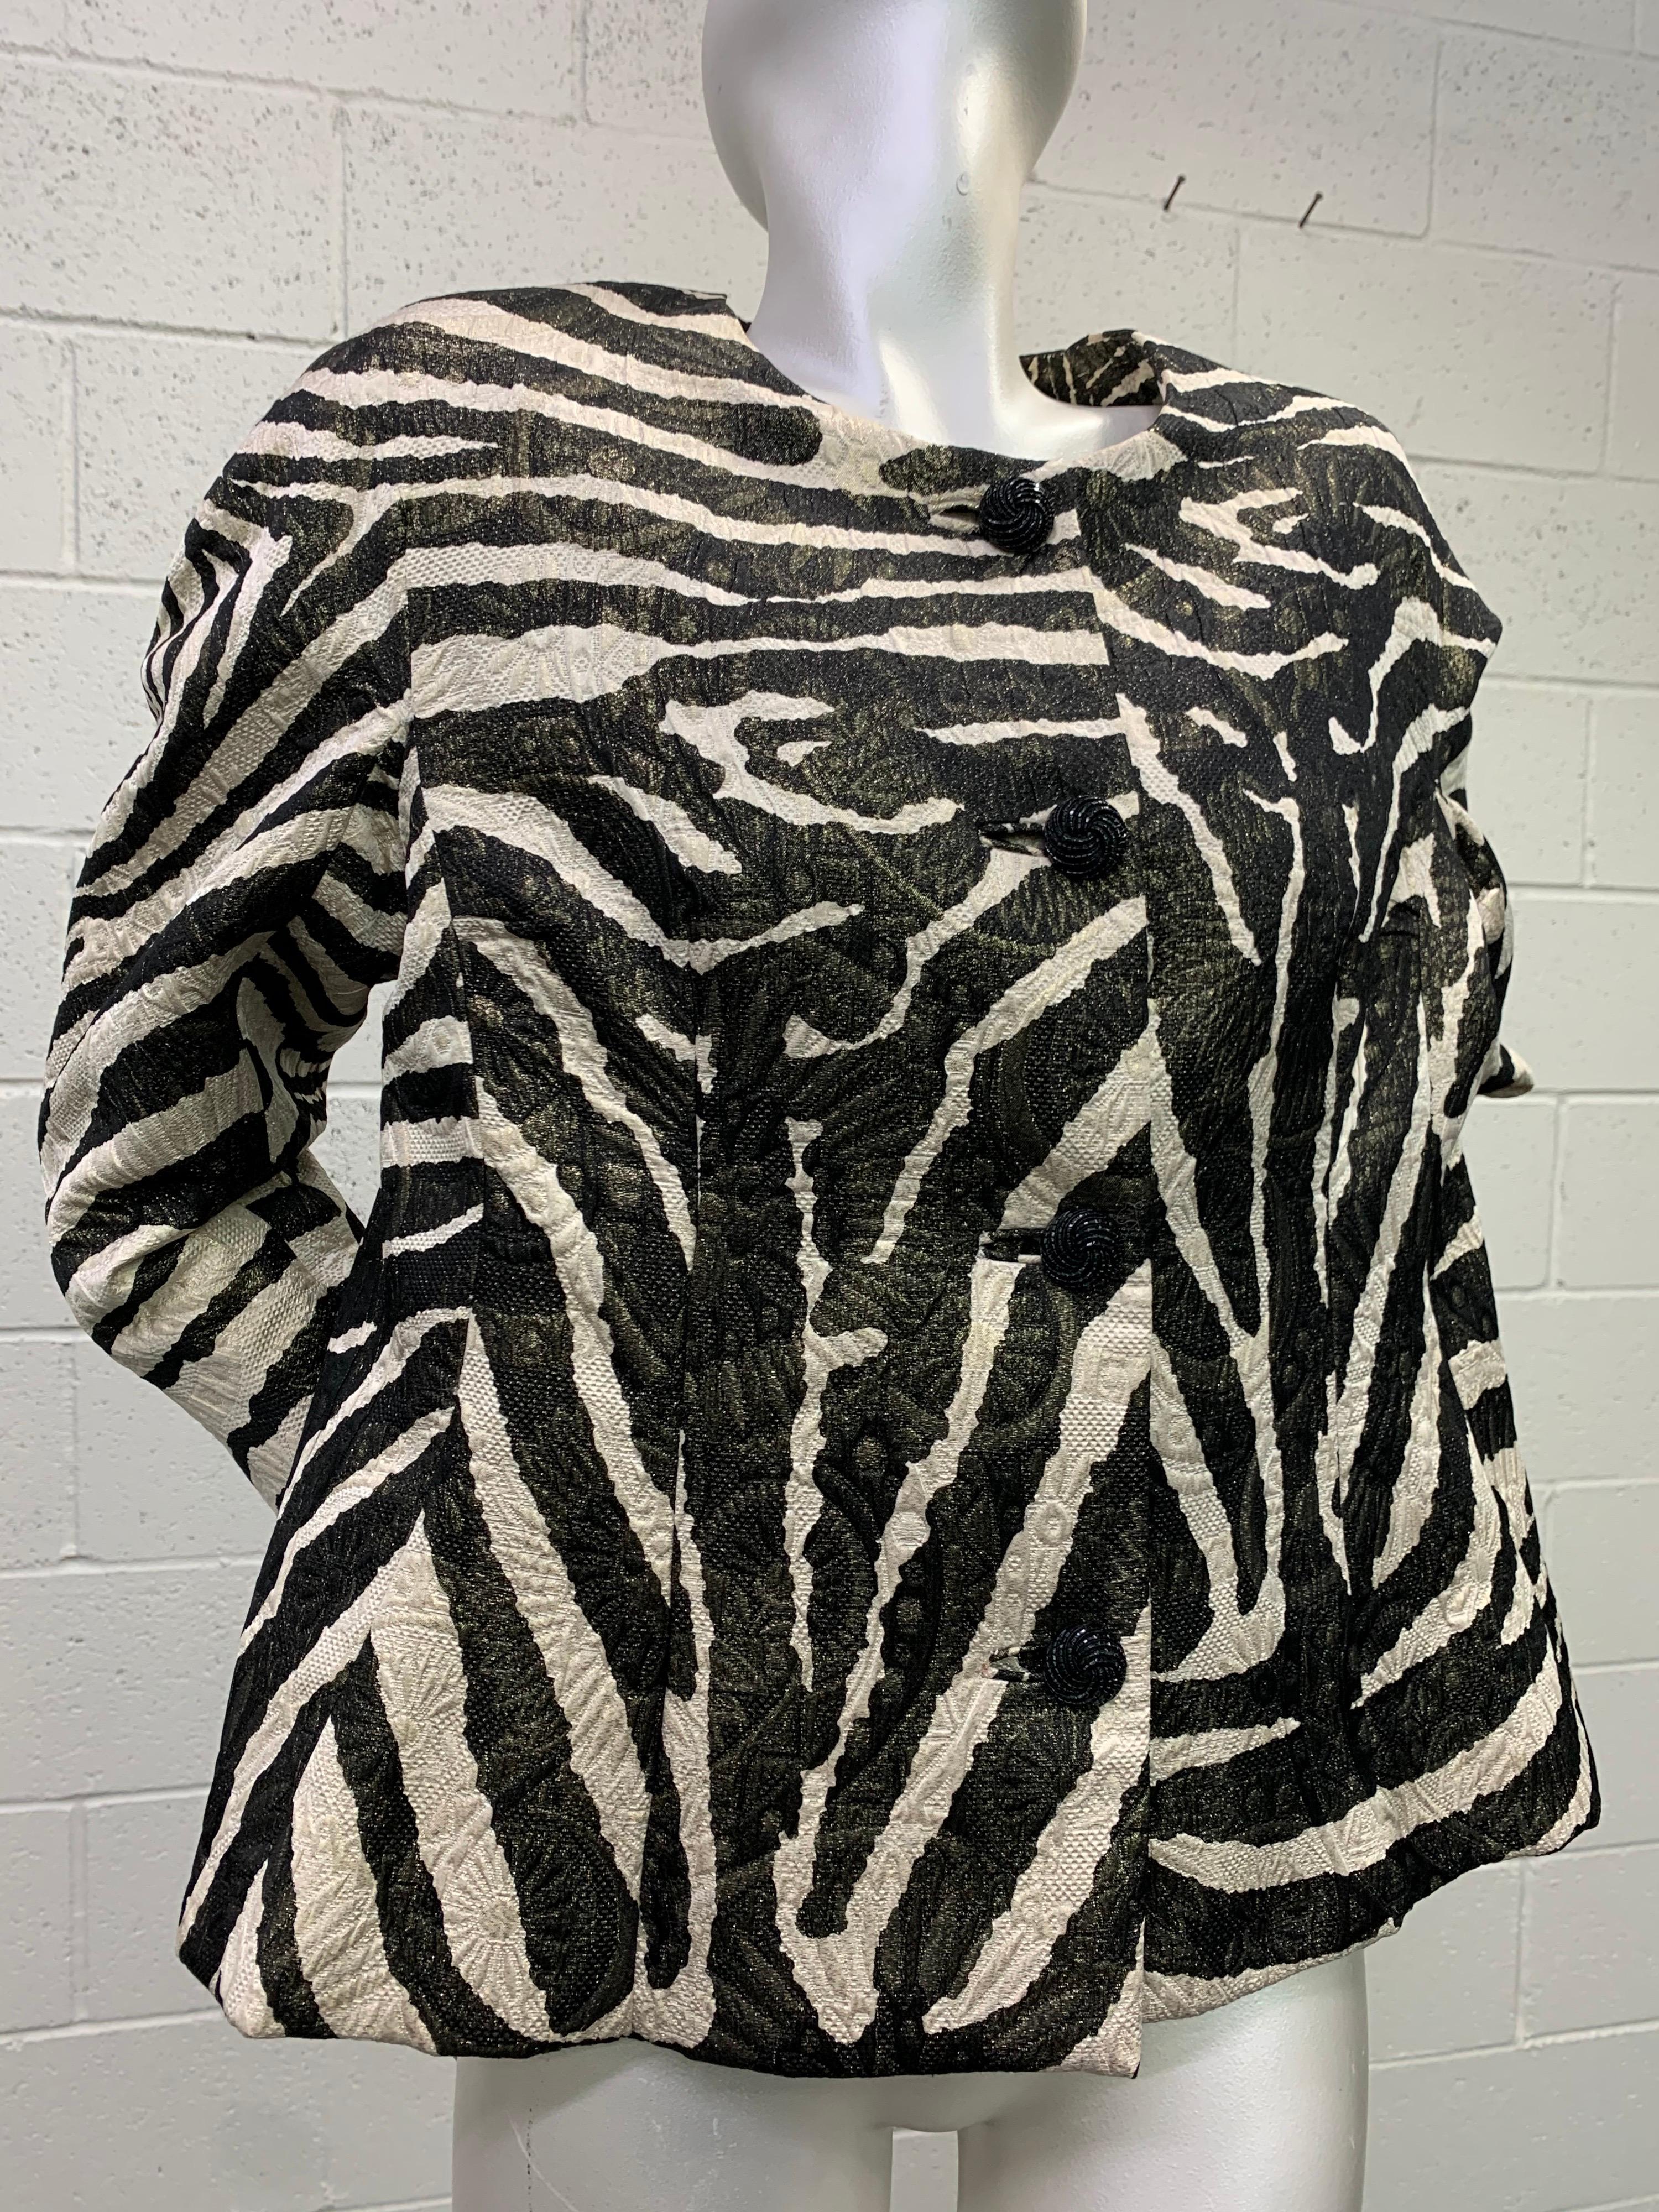 1980s Arnold Scaasi zebra print black and white matelasse brocade boxy jacket:  Collarless, boxy-cut with red silk lining. Back panel utilizes clever pattern paneling to resemble a zebra head at center back. Center back vent. Padded shoulders. Fits